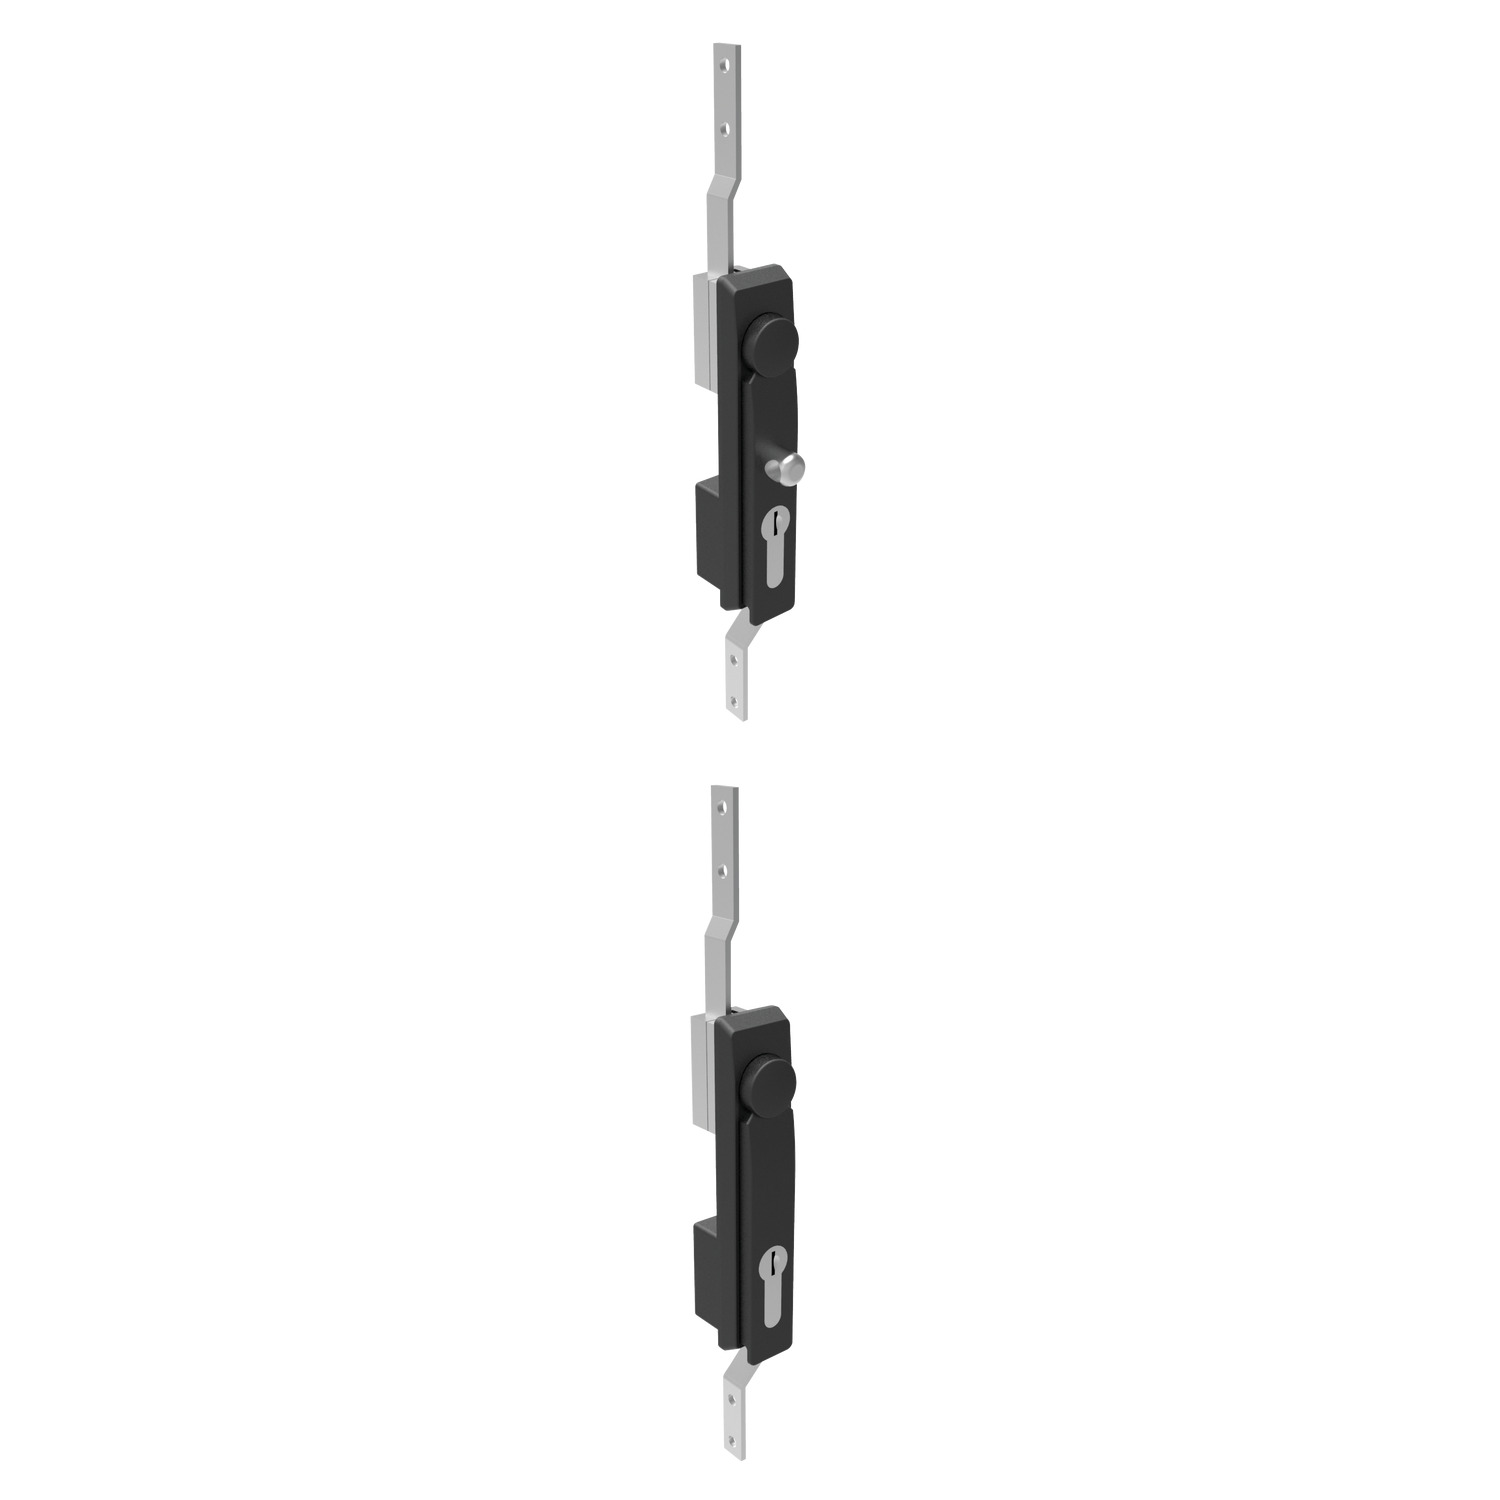 B2088 Swing Handles - with Rod Control